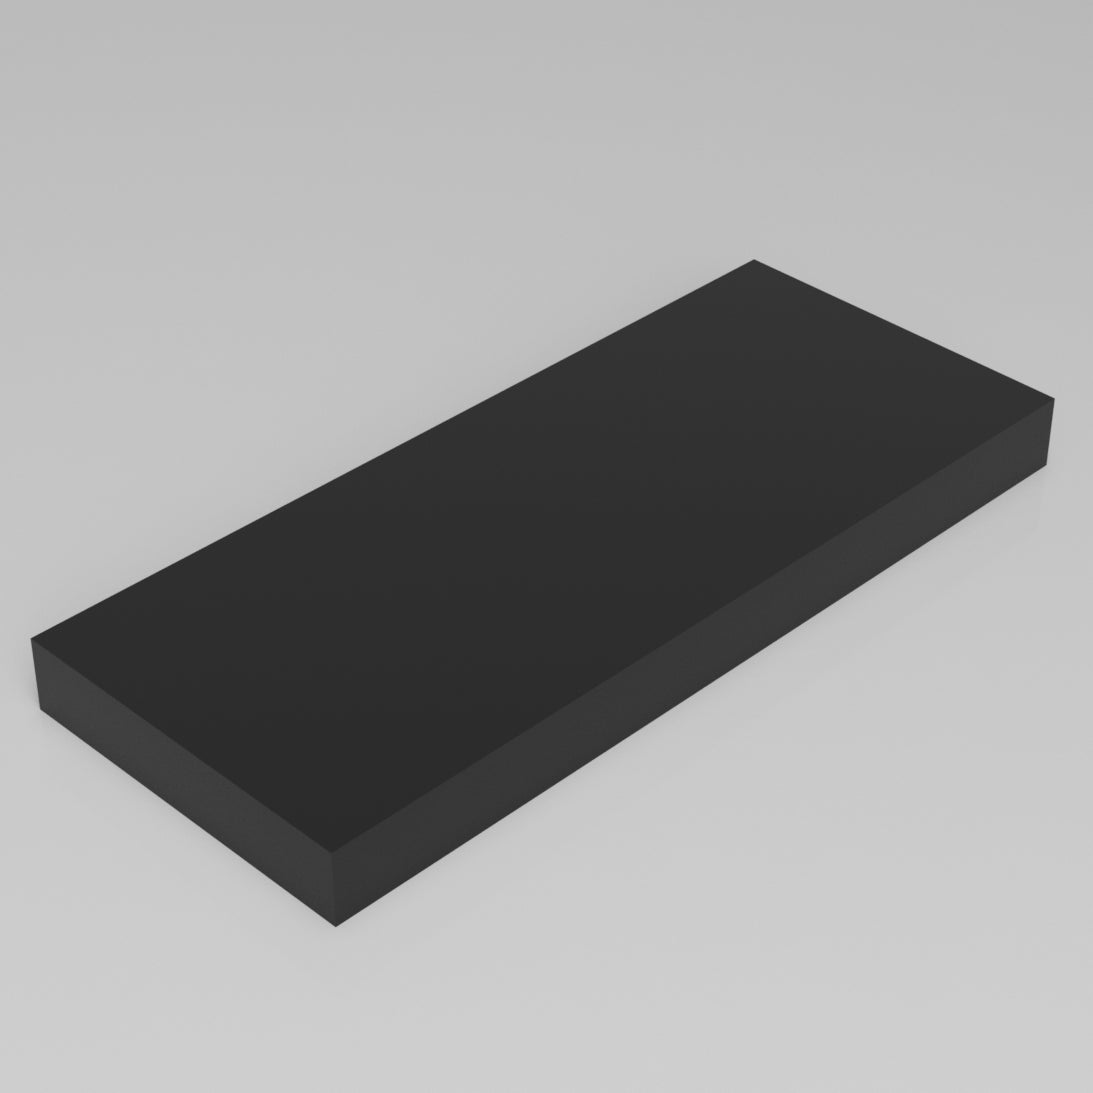 Machinable Wax Rectangular Block Front View 2 Inch by 10 Inch by 24 Inch